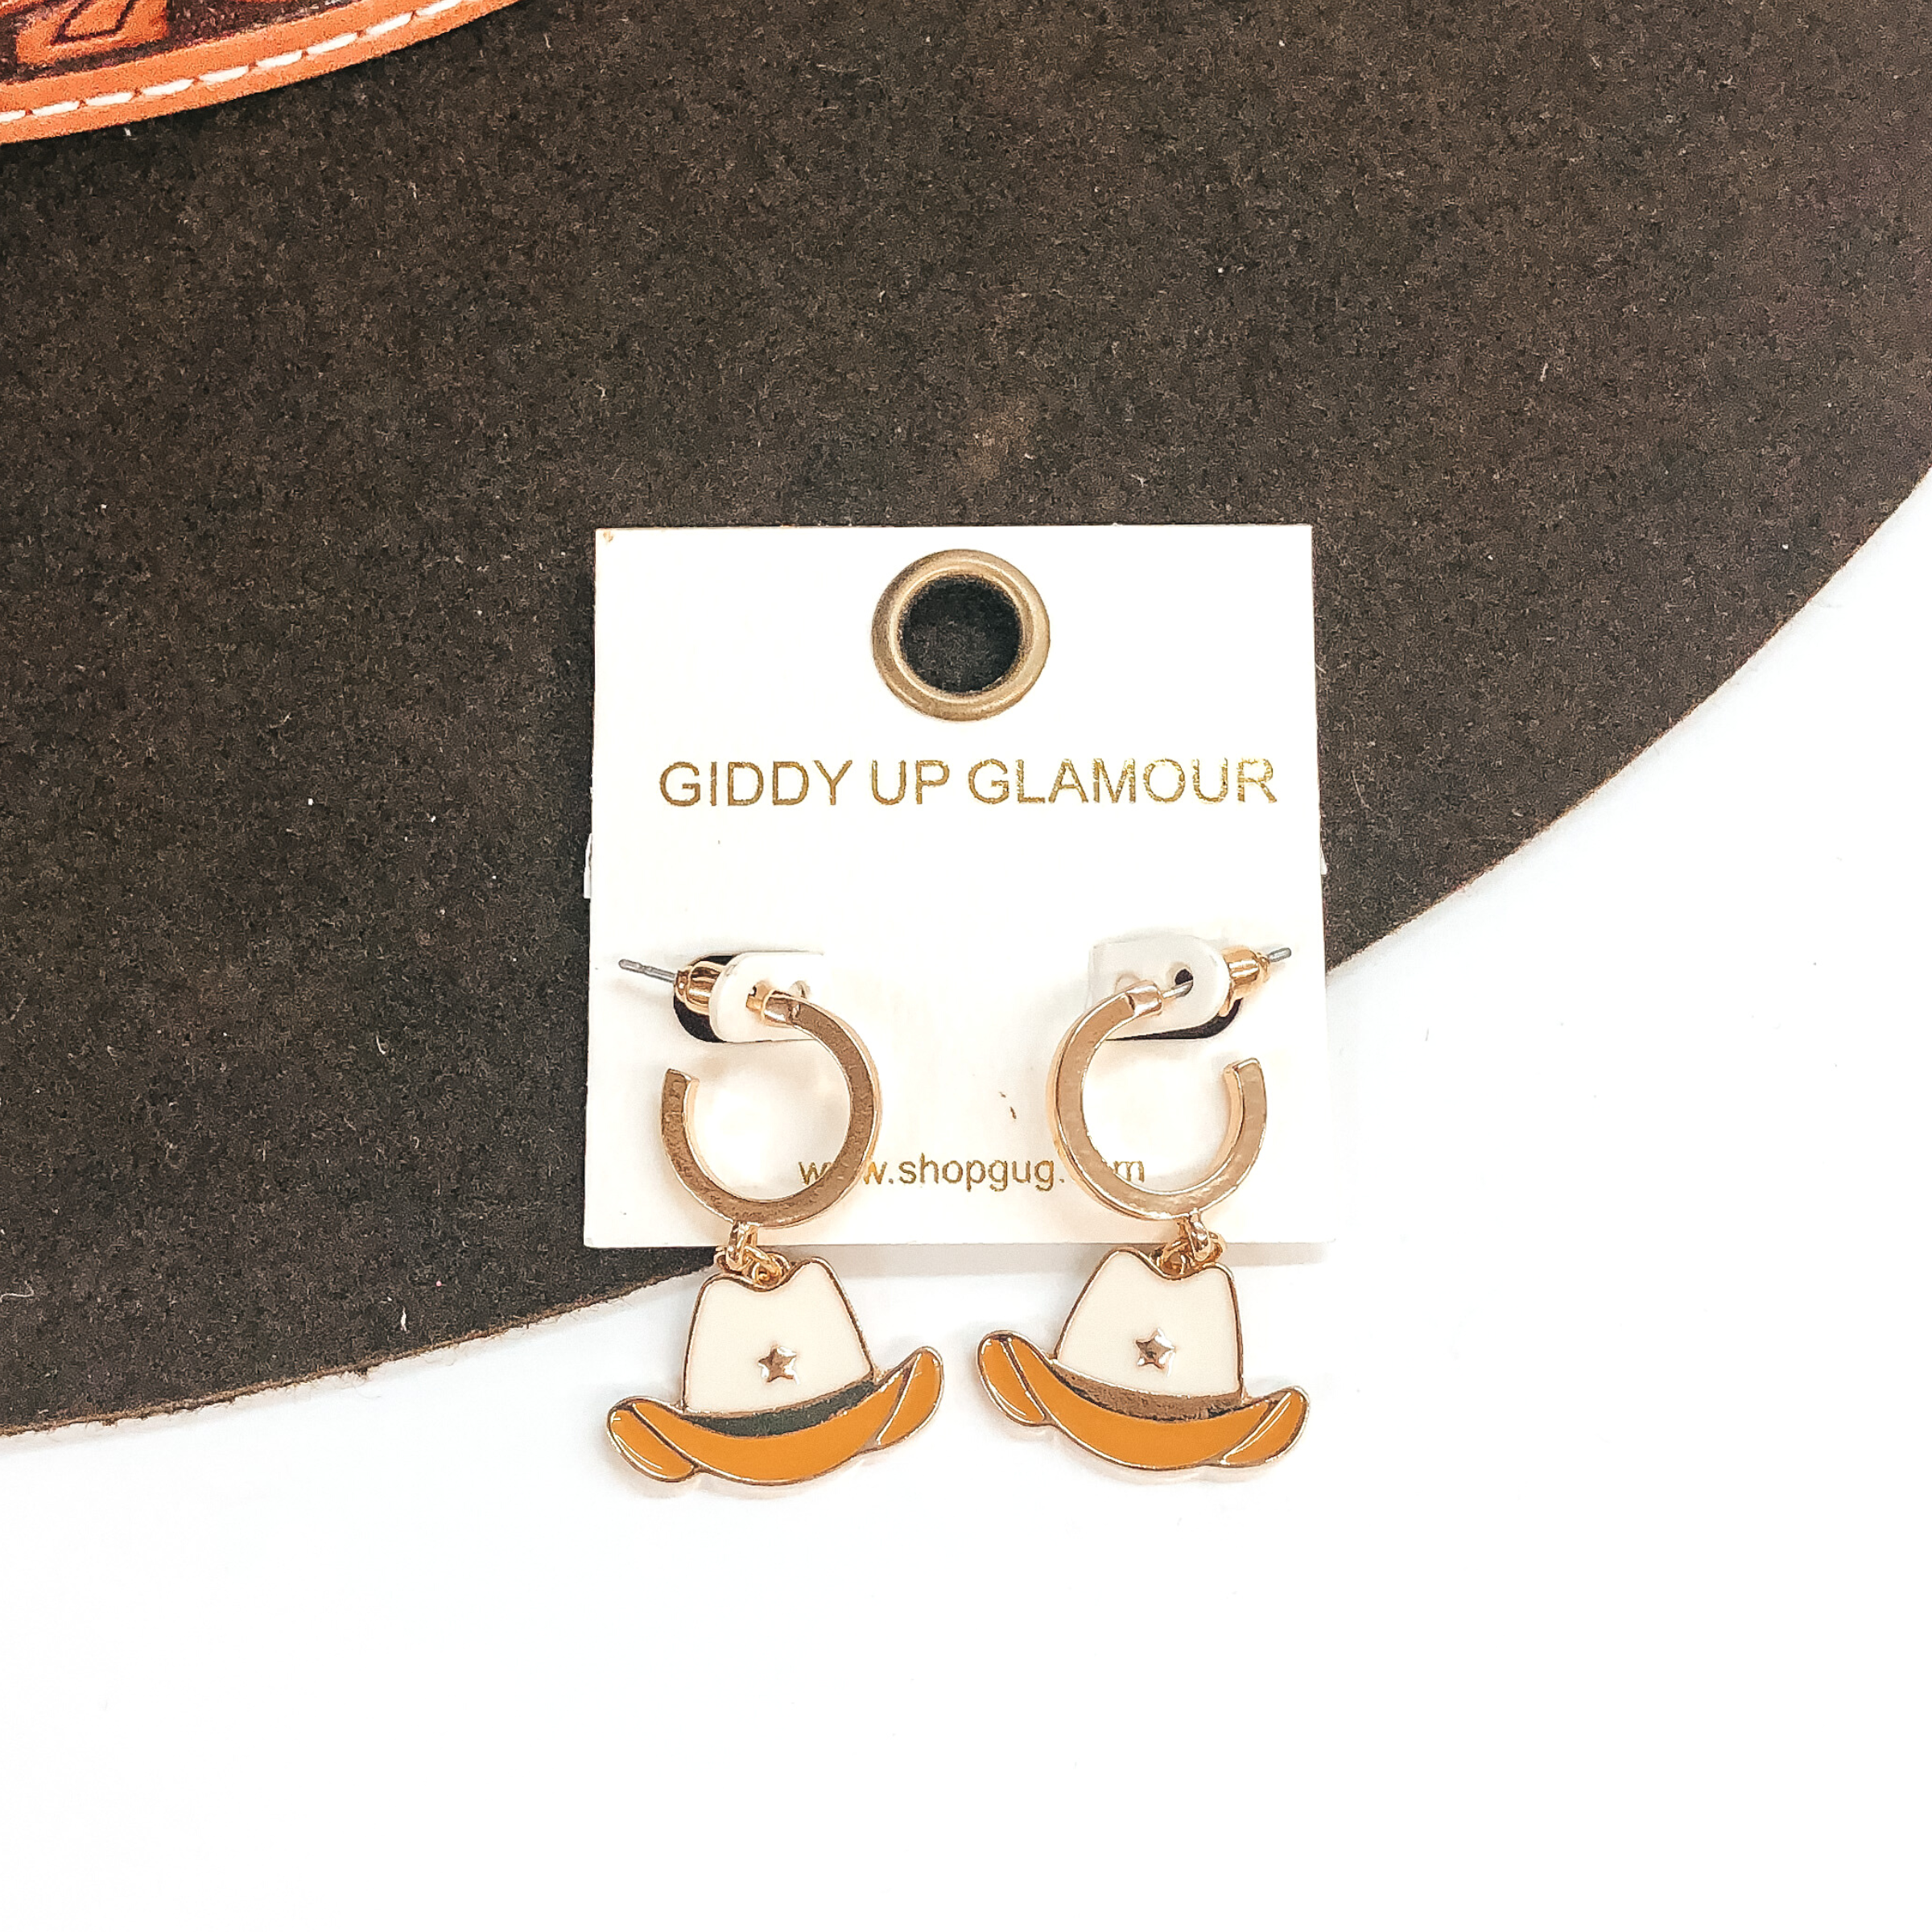 Small gold hoop earrings with a ivory and tan hat pendant hanging from the bottom. These earrings are pictured on a white and brown background. 